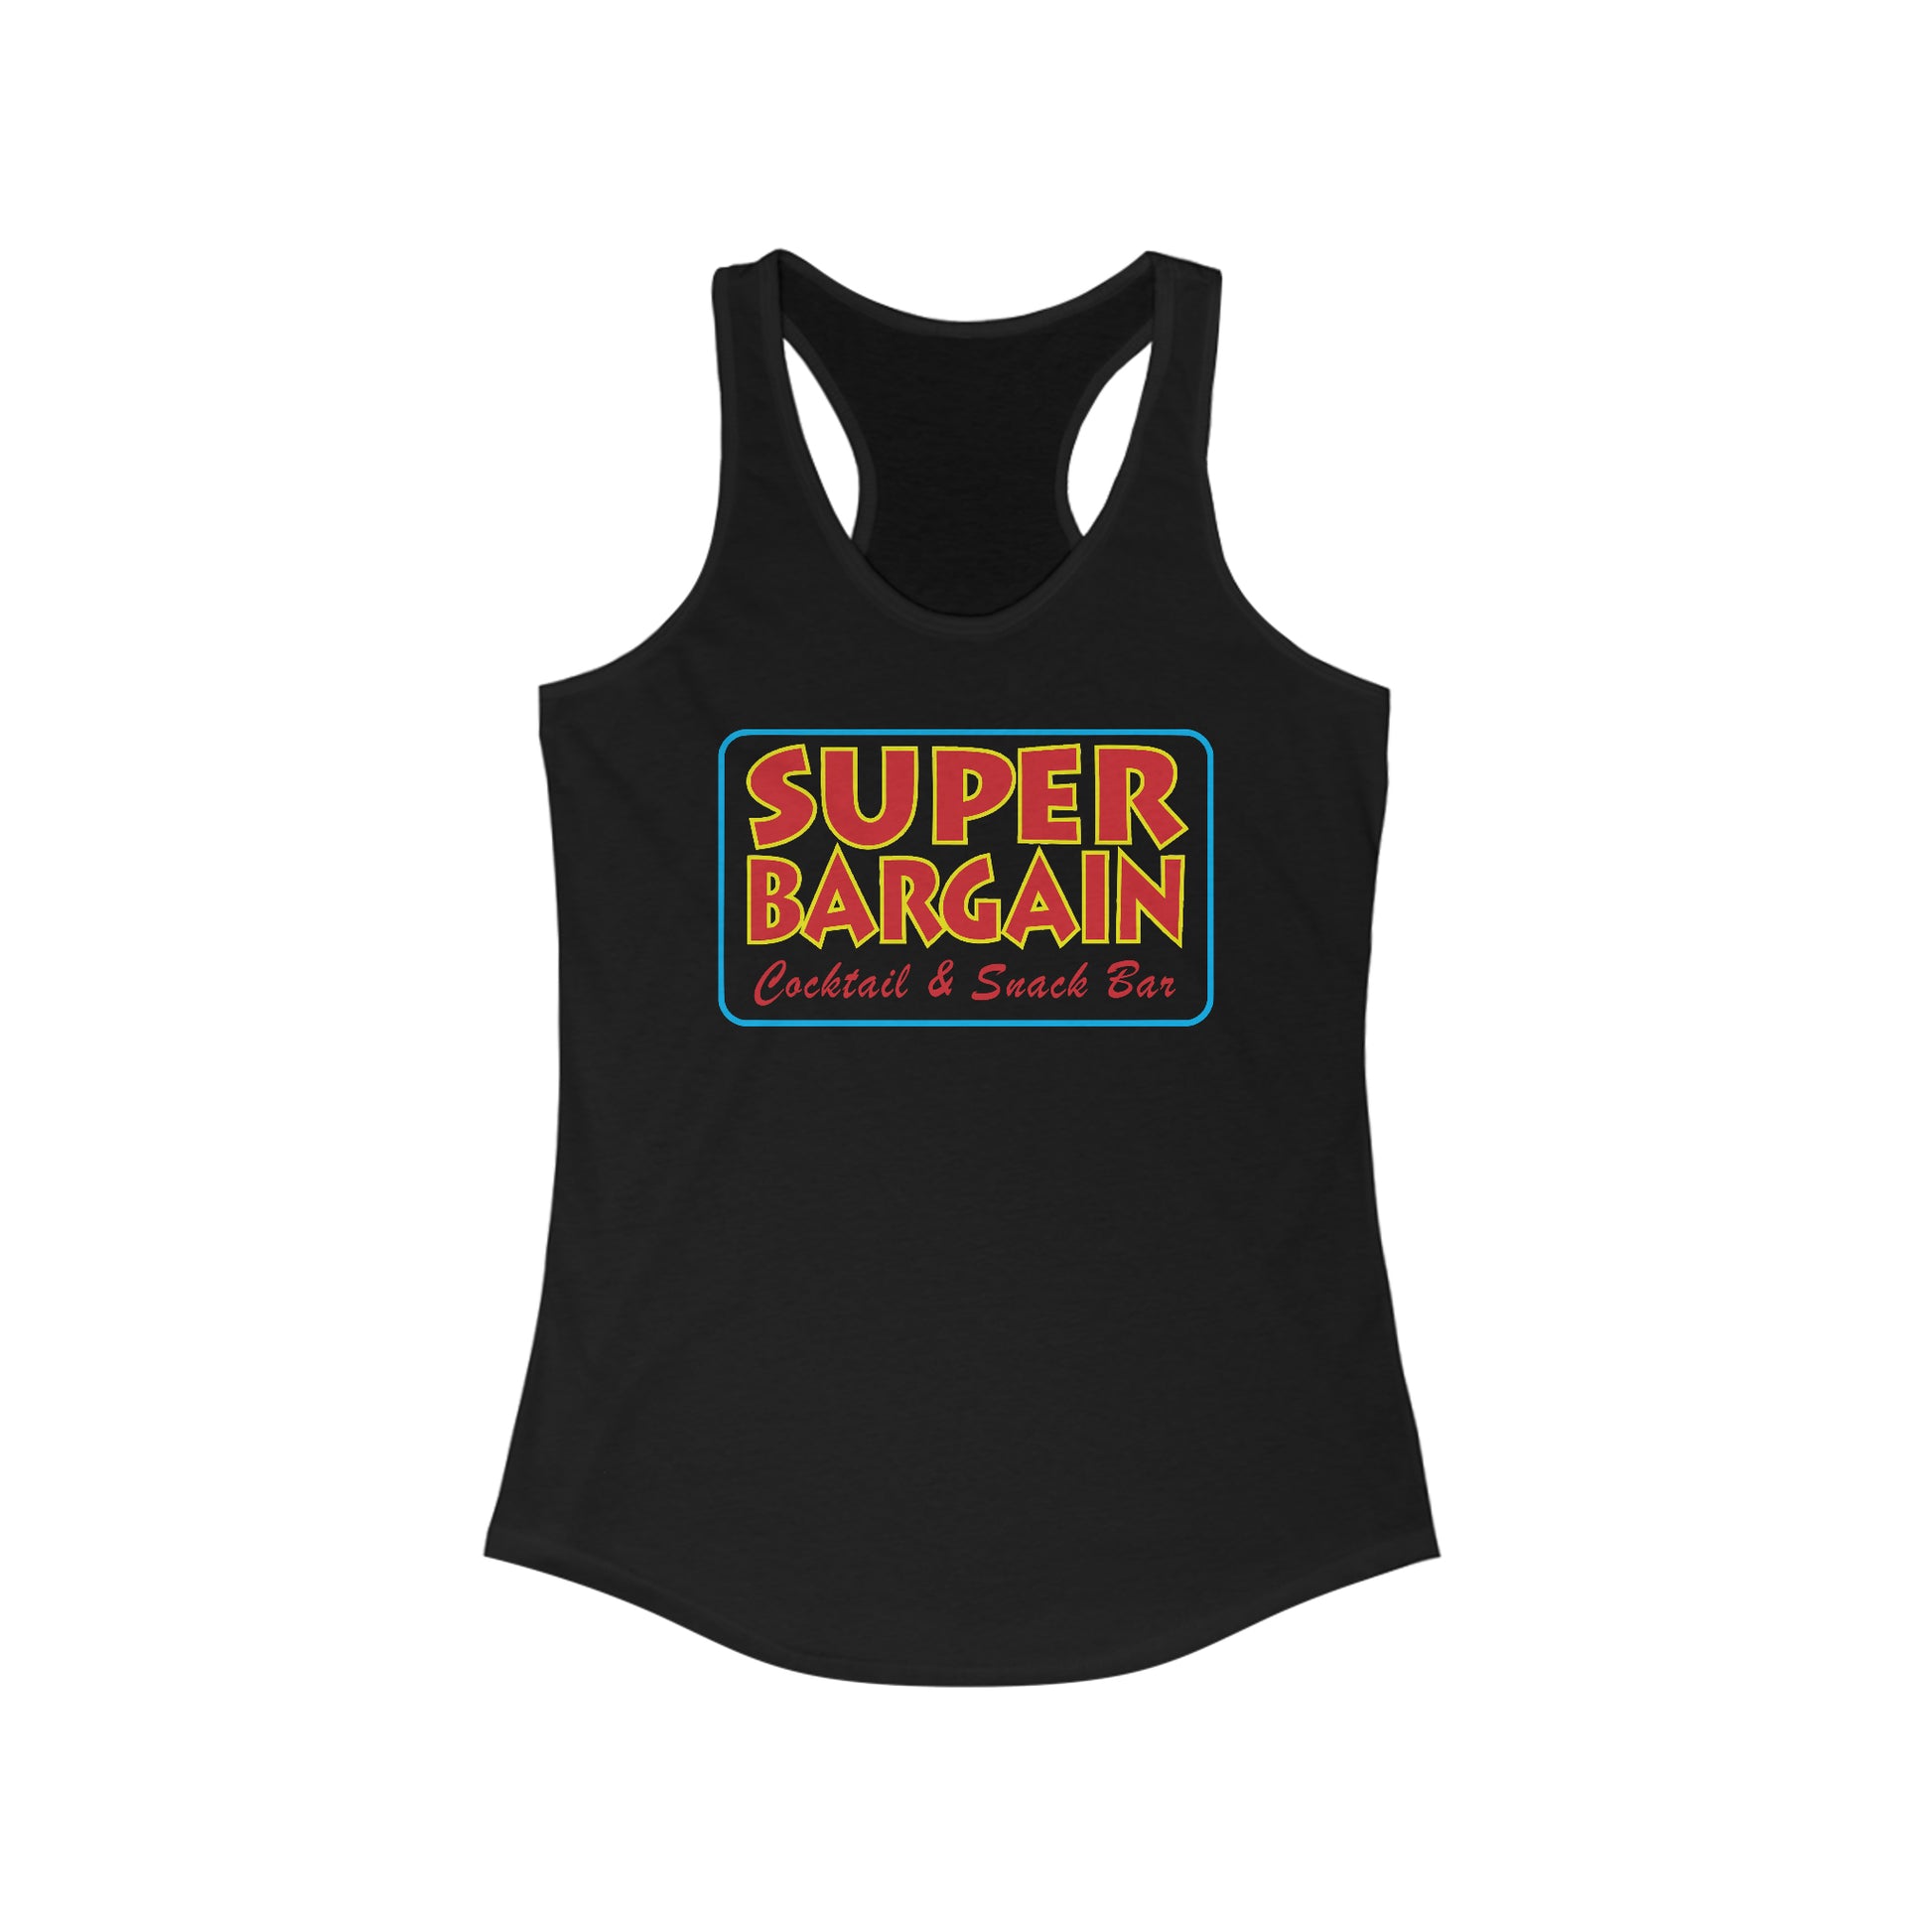 Black Printify Women's Logo Racerback Tank featuring a colorful logo that reads "SUPER BARGAIN Cocktail & Snack Bar - Cabbagetown, Toronto" in bold, retro-style lettering. The background colors of the logo are green, yellow, and red.